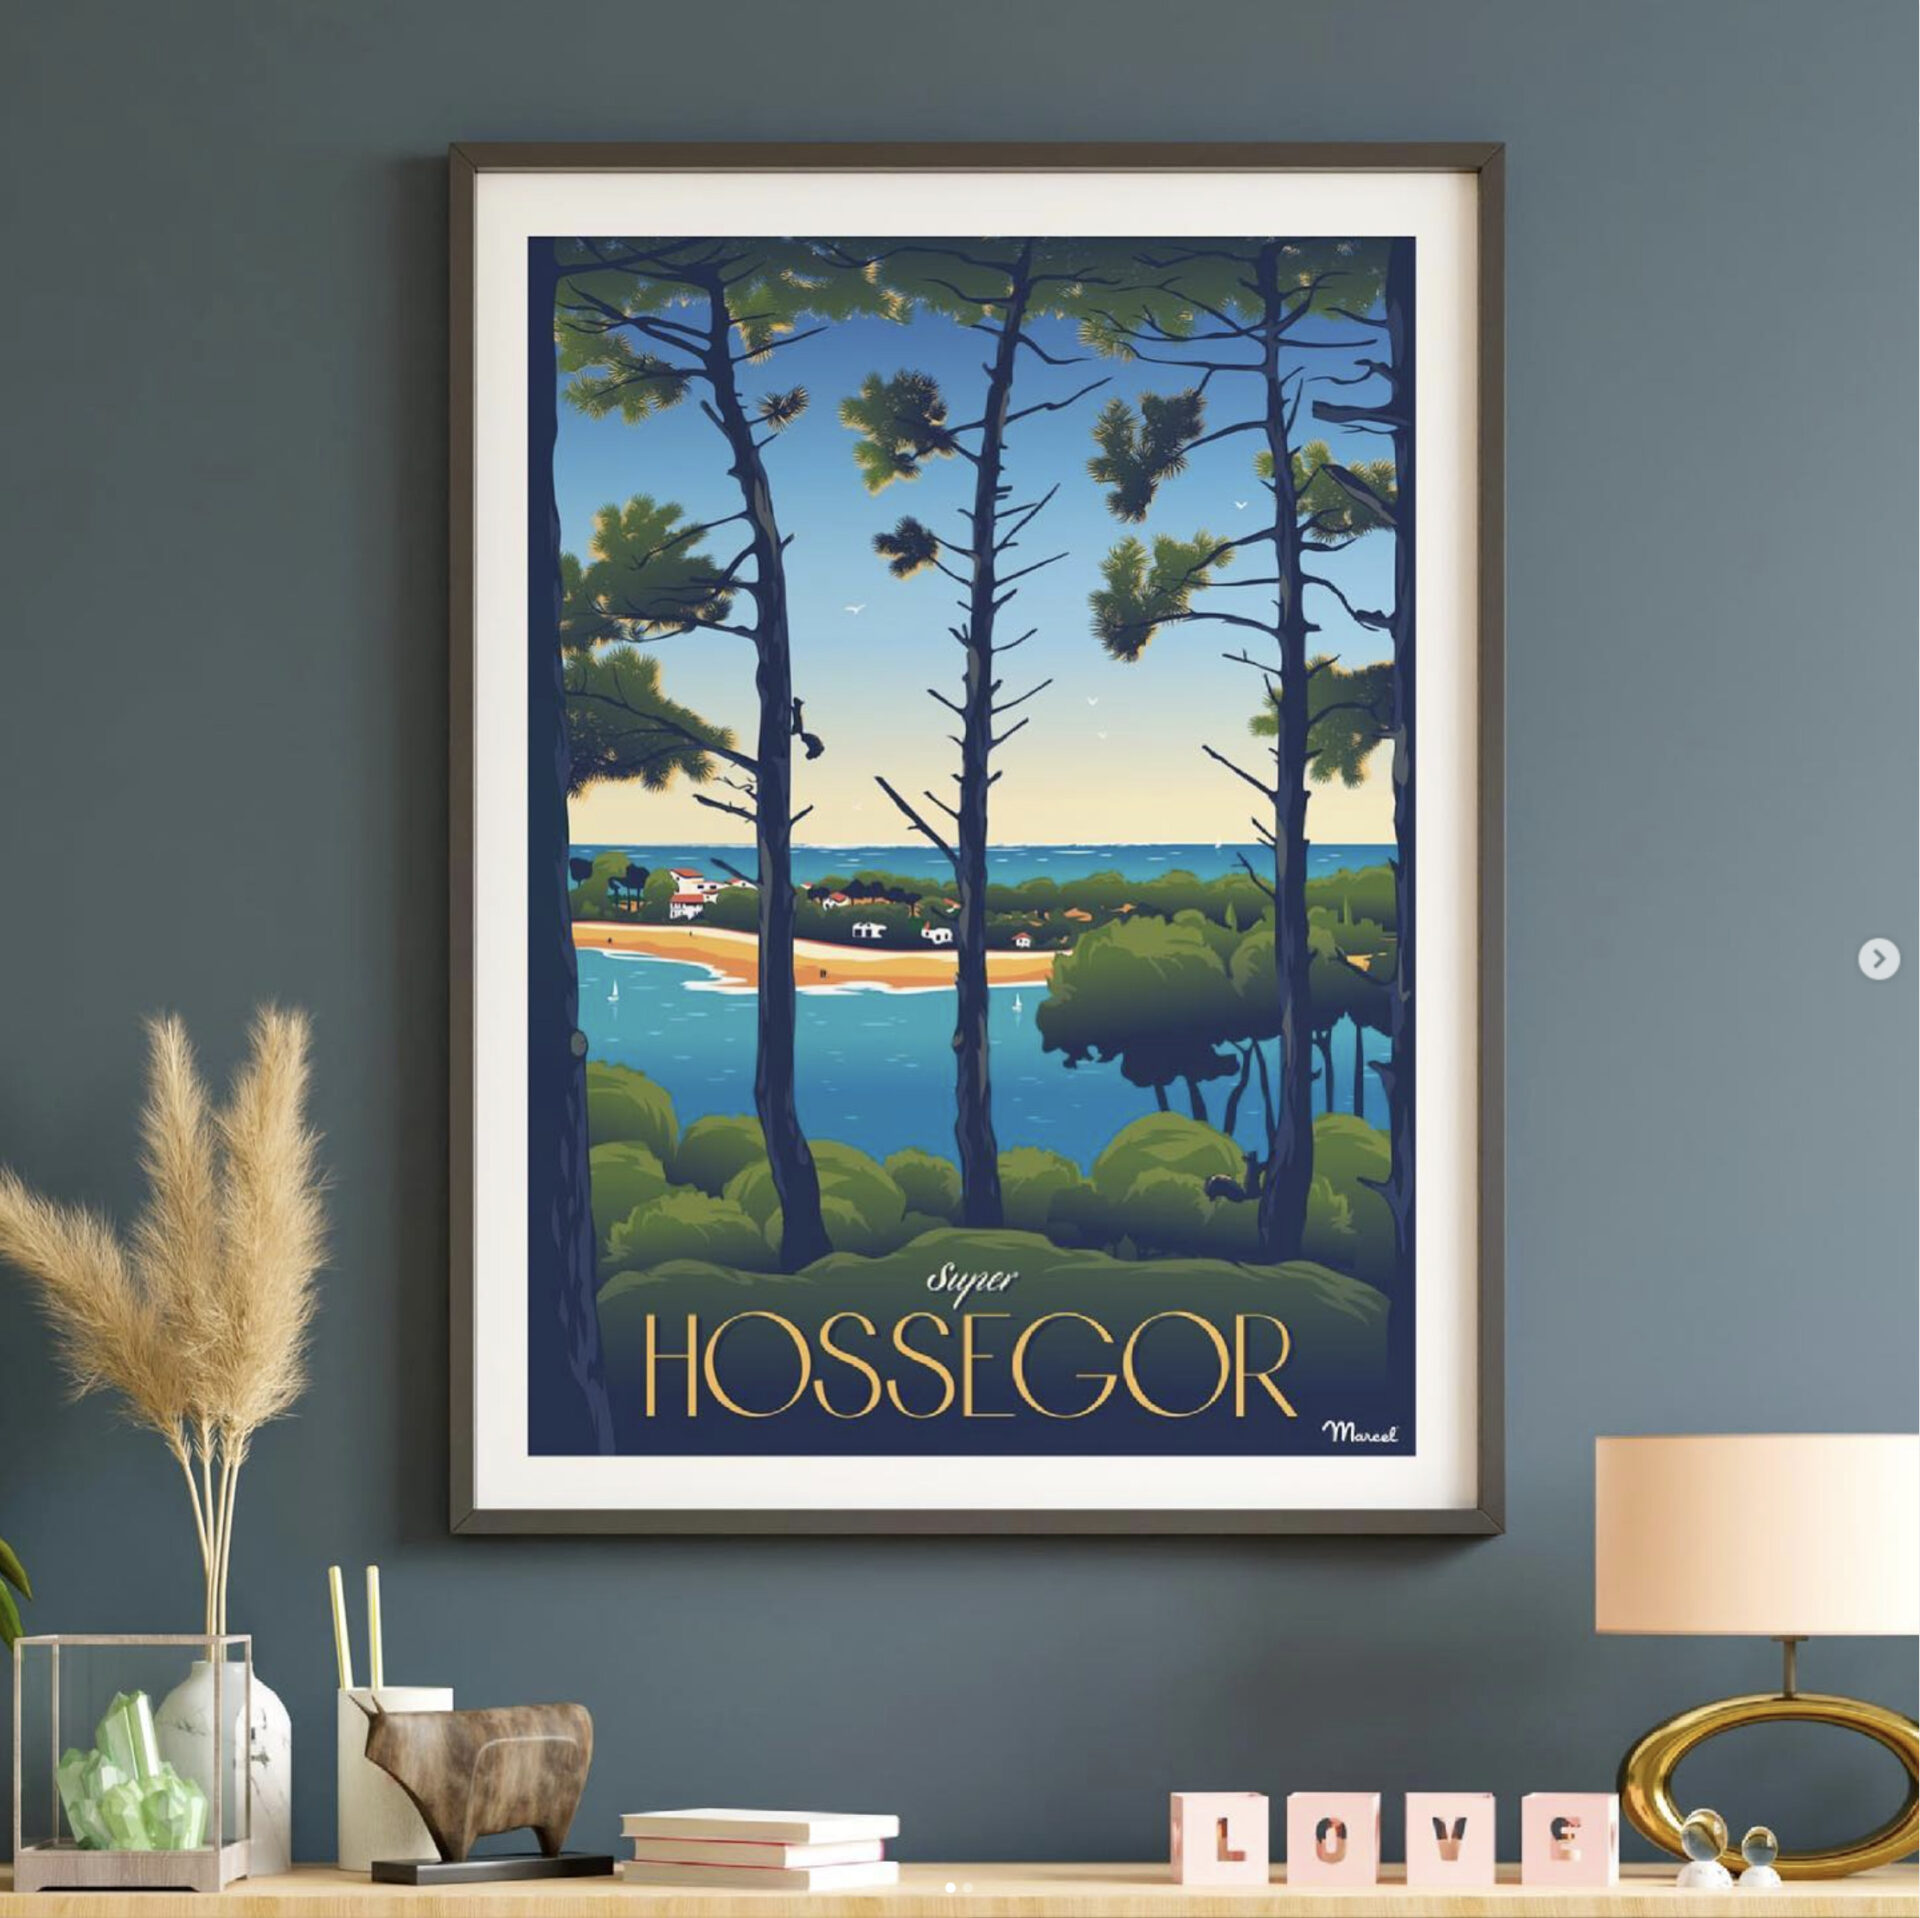 Marcel Travel Posters